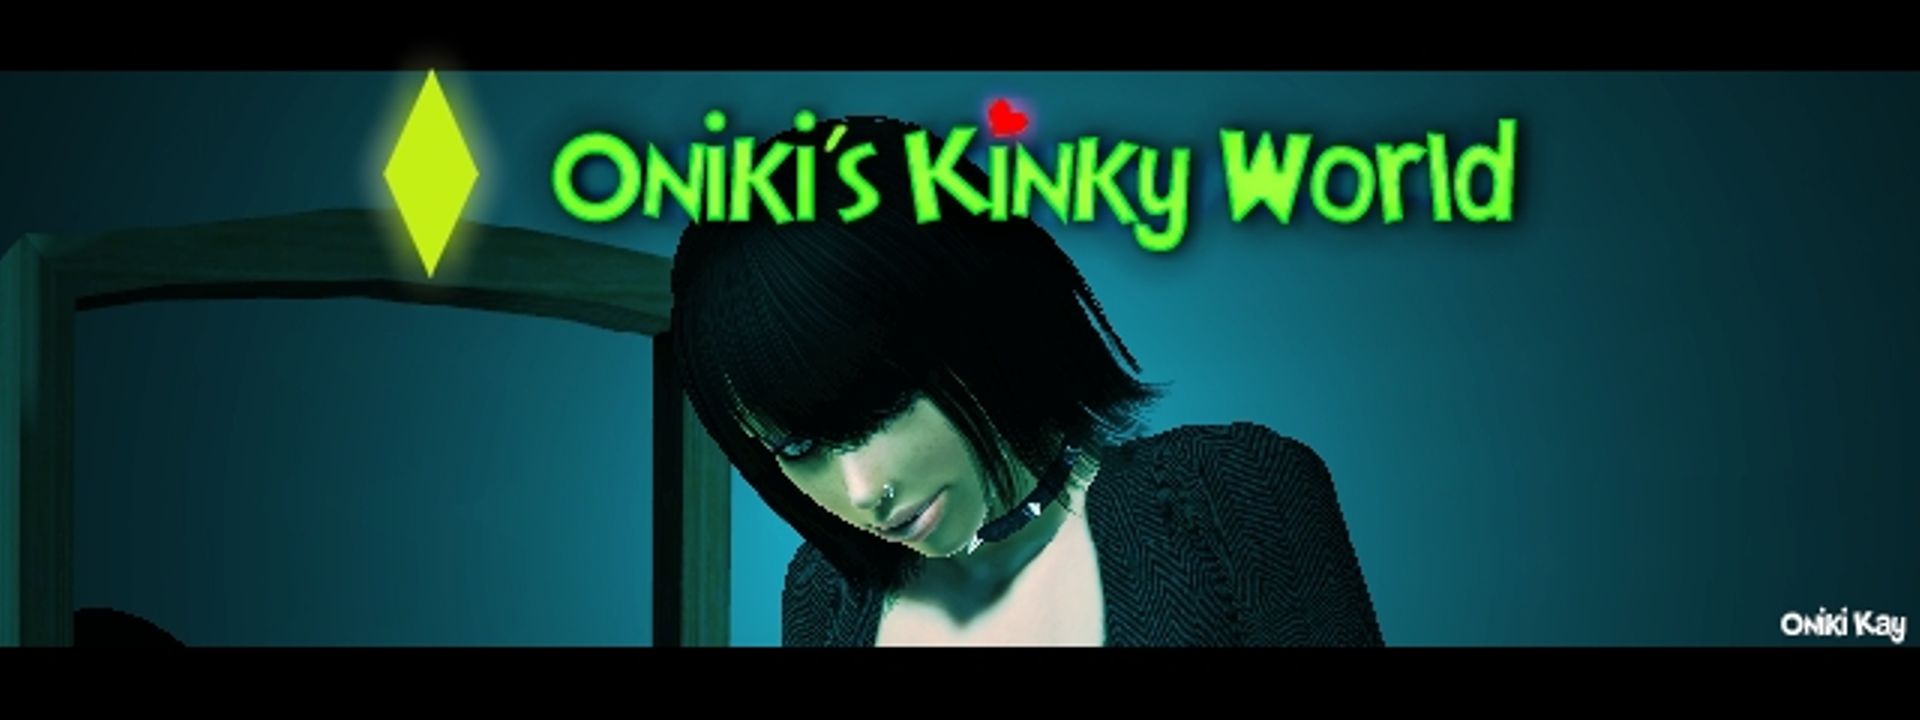 kinky world sims 3 not showing up